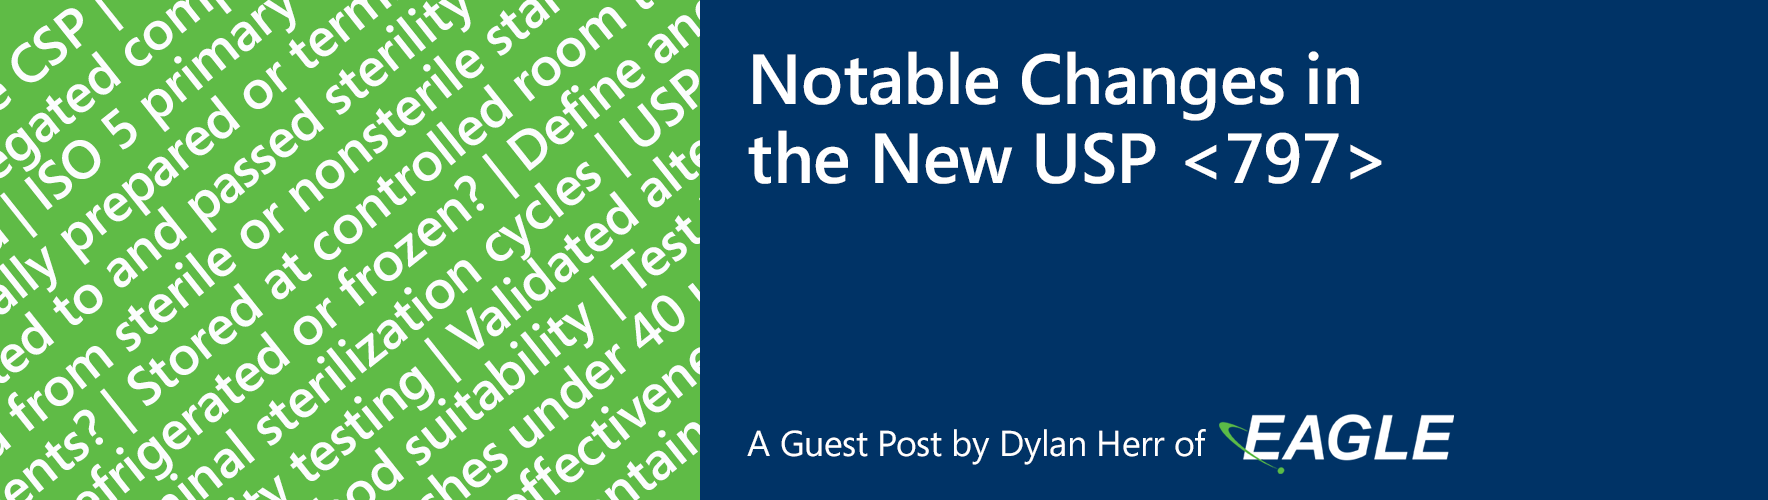 Notable_Changes_in_the_New_USP_797.png